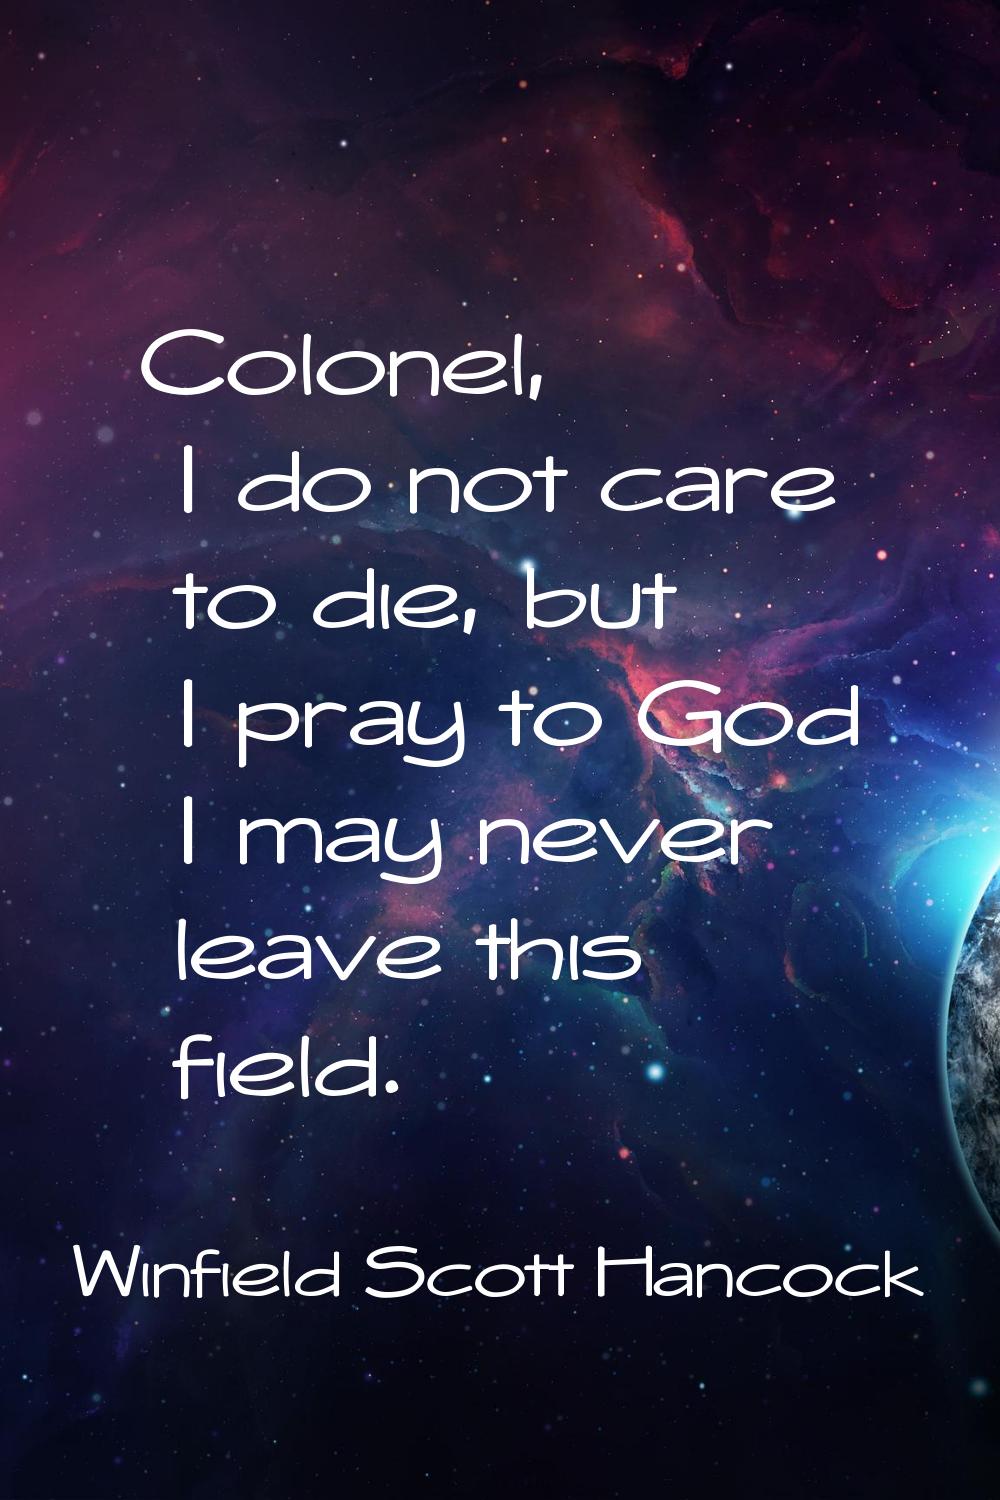 Colonel, I do not care to die, but I pray to God I may never leave this field.